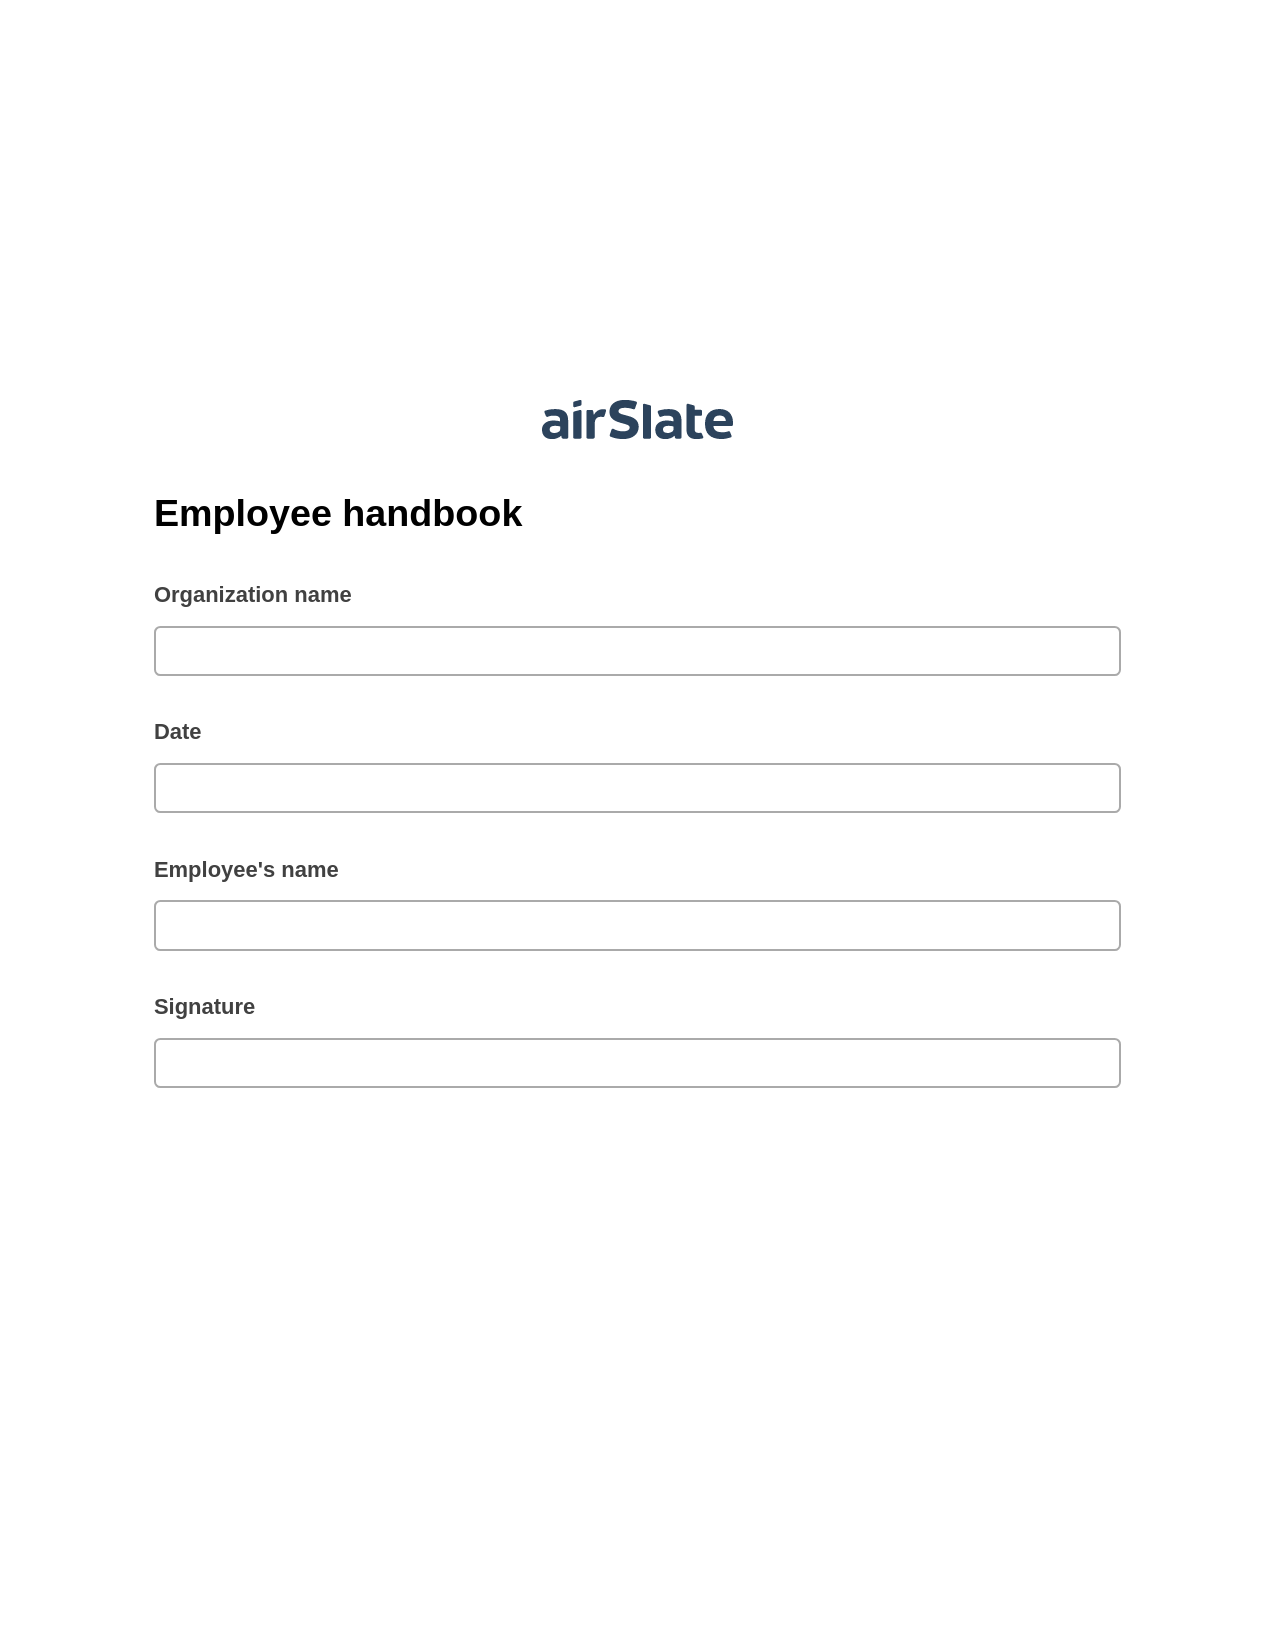 Employee handbook Pre-fill from another Slate Bot, Create MS Dynamics 365 Records Bot, Dropbox Bot